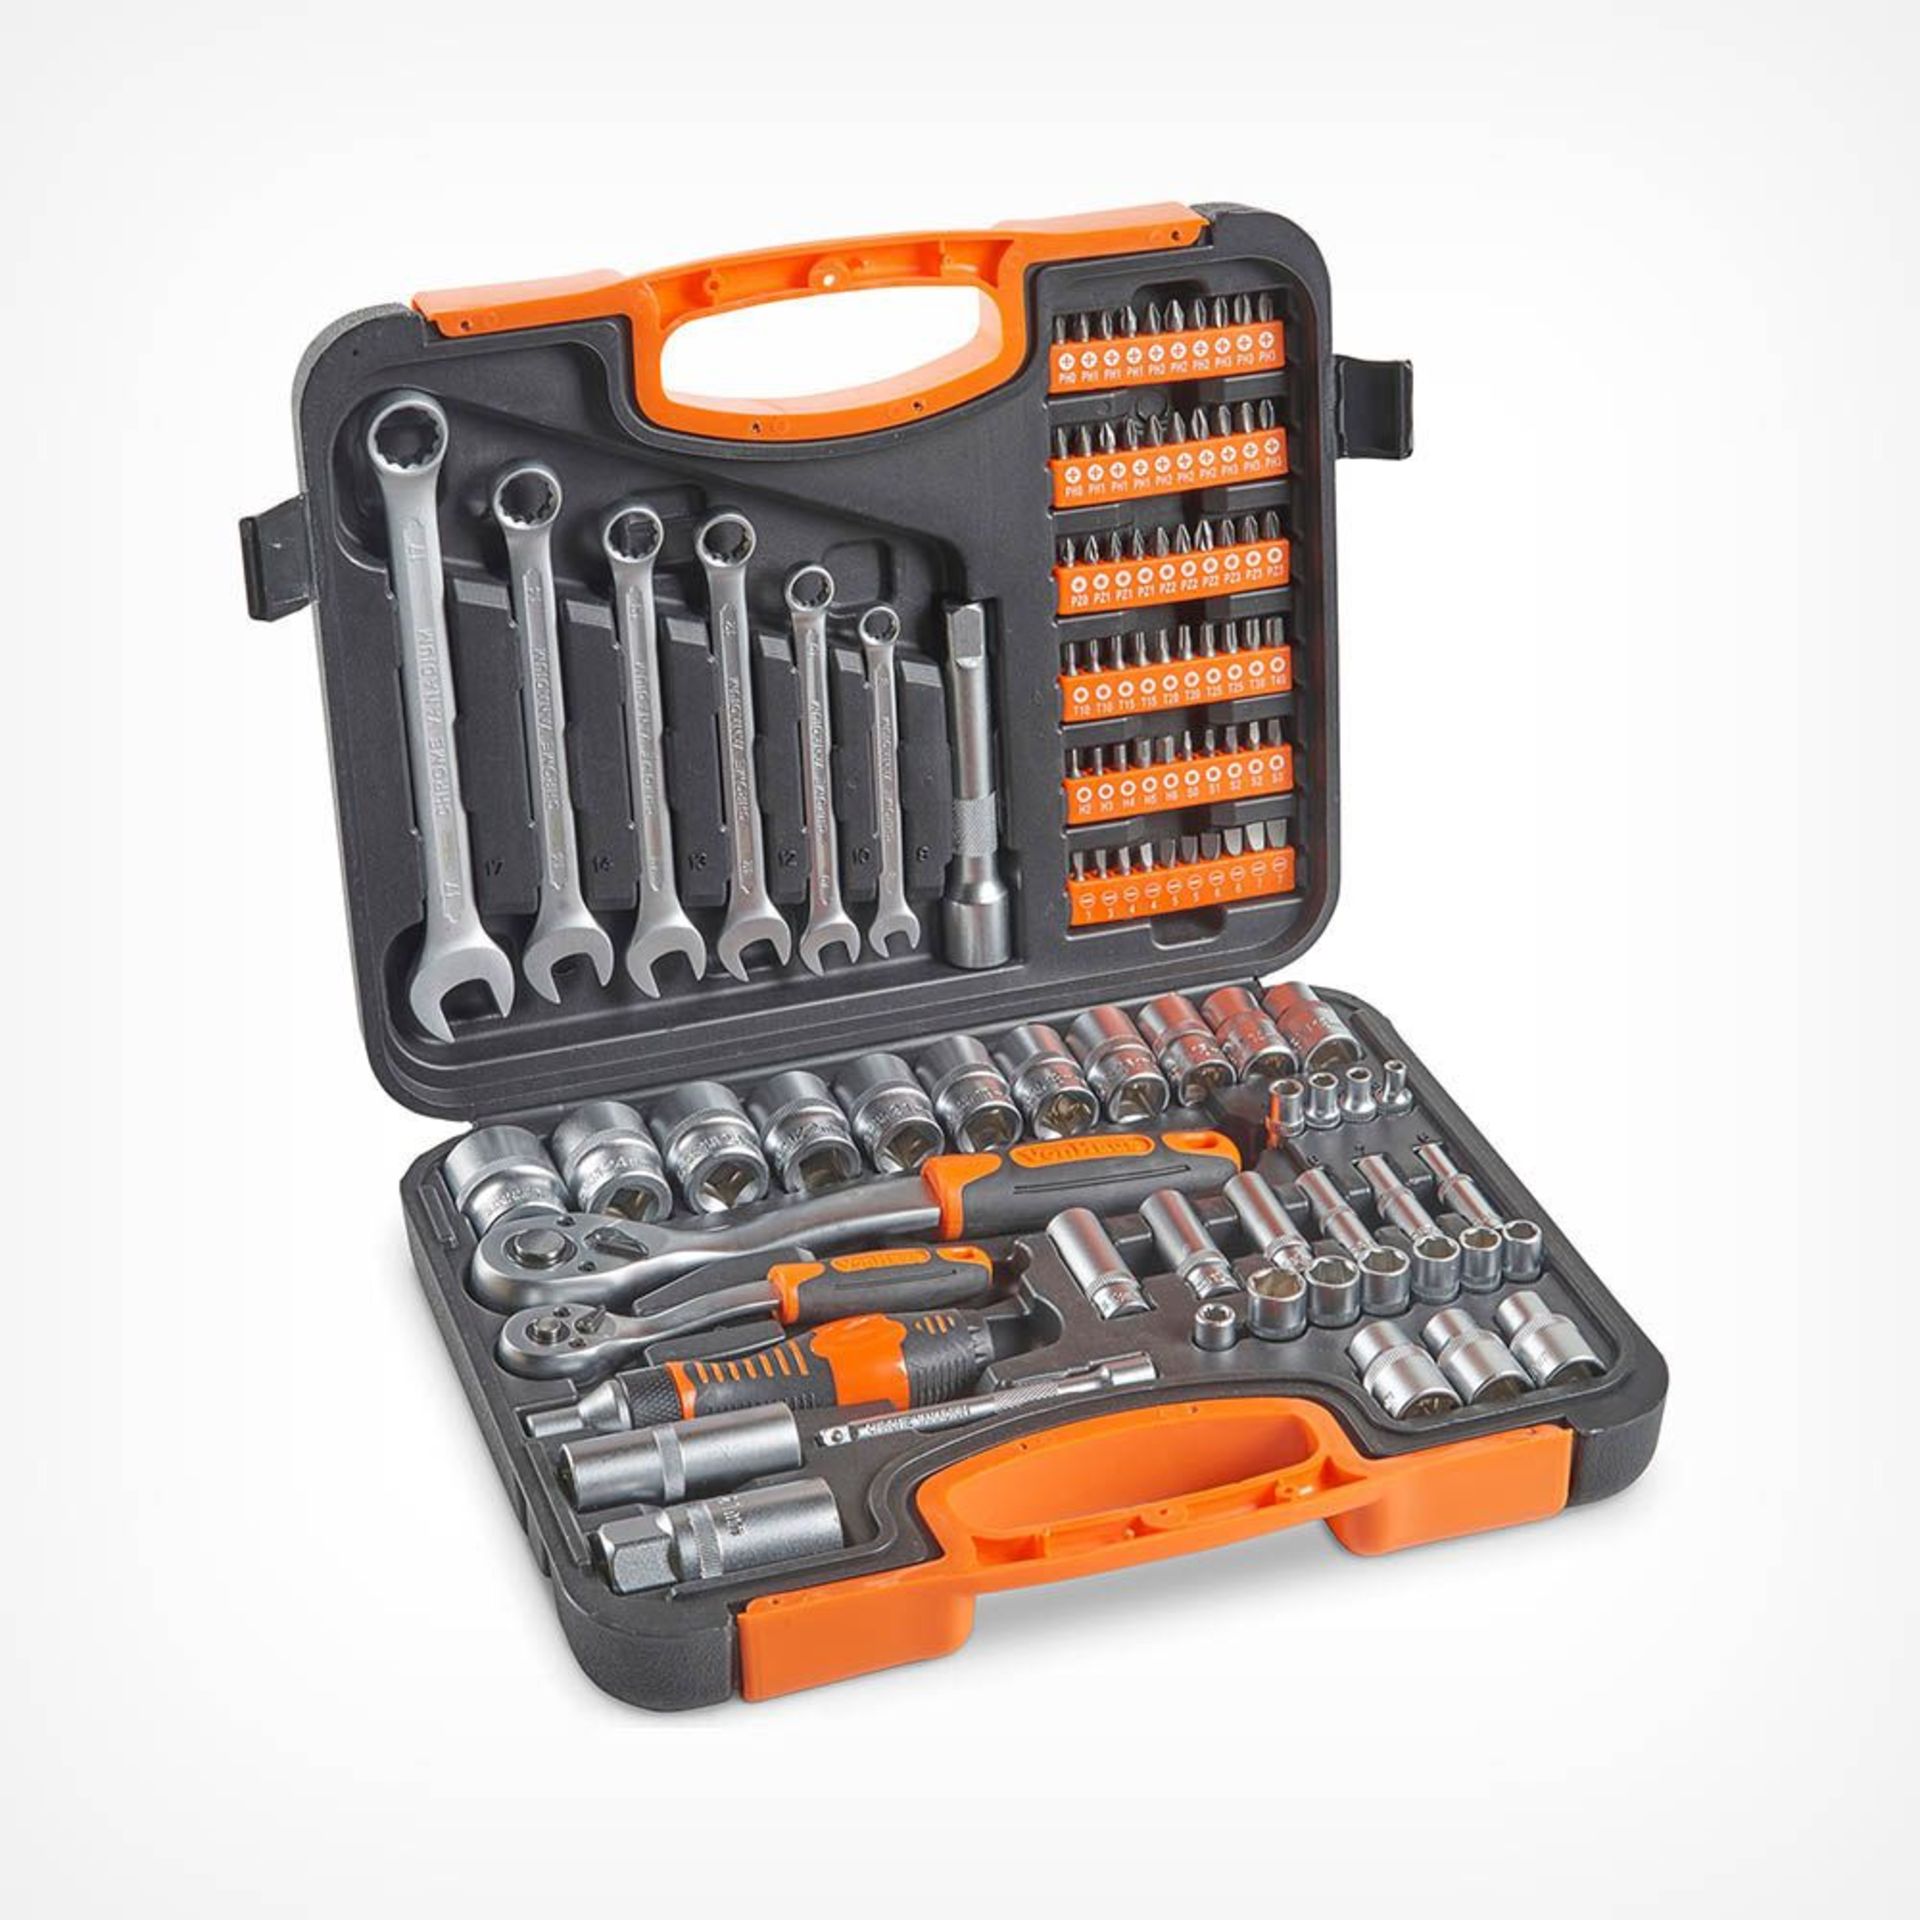 104pc Socket Set. If you’ve ever found yourself hunting around for the right spanner or socket